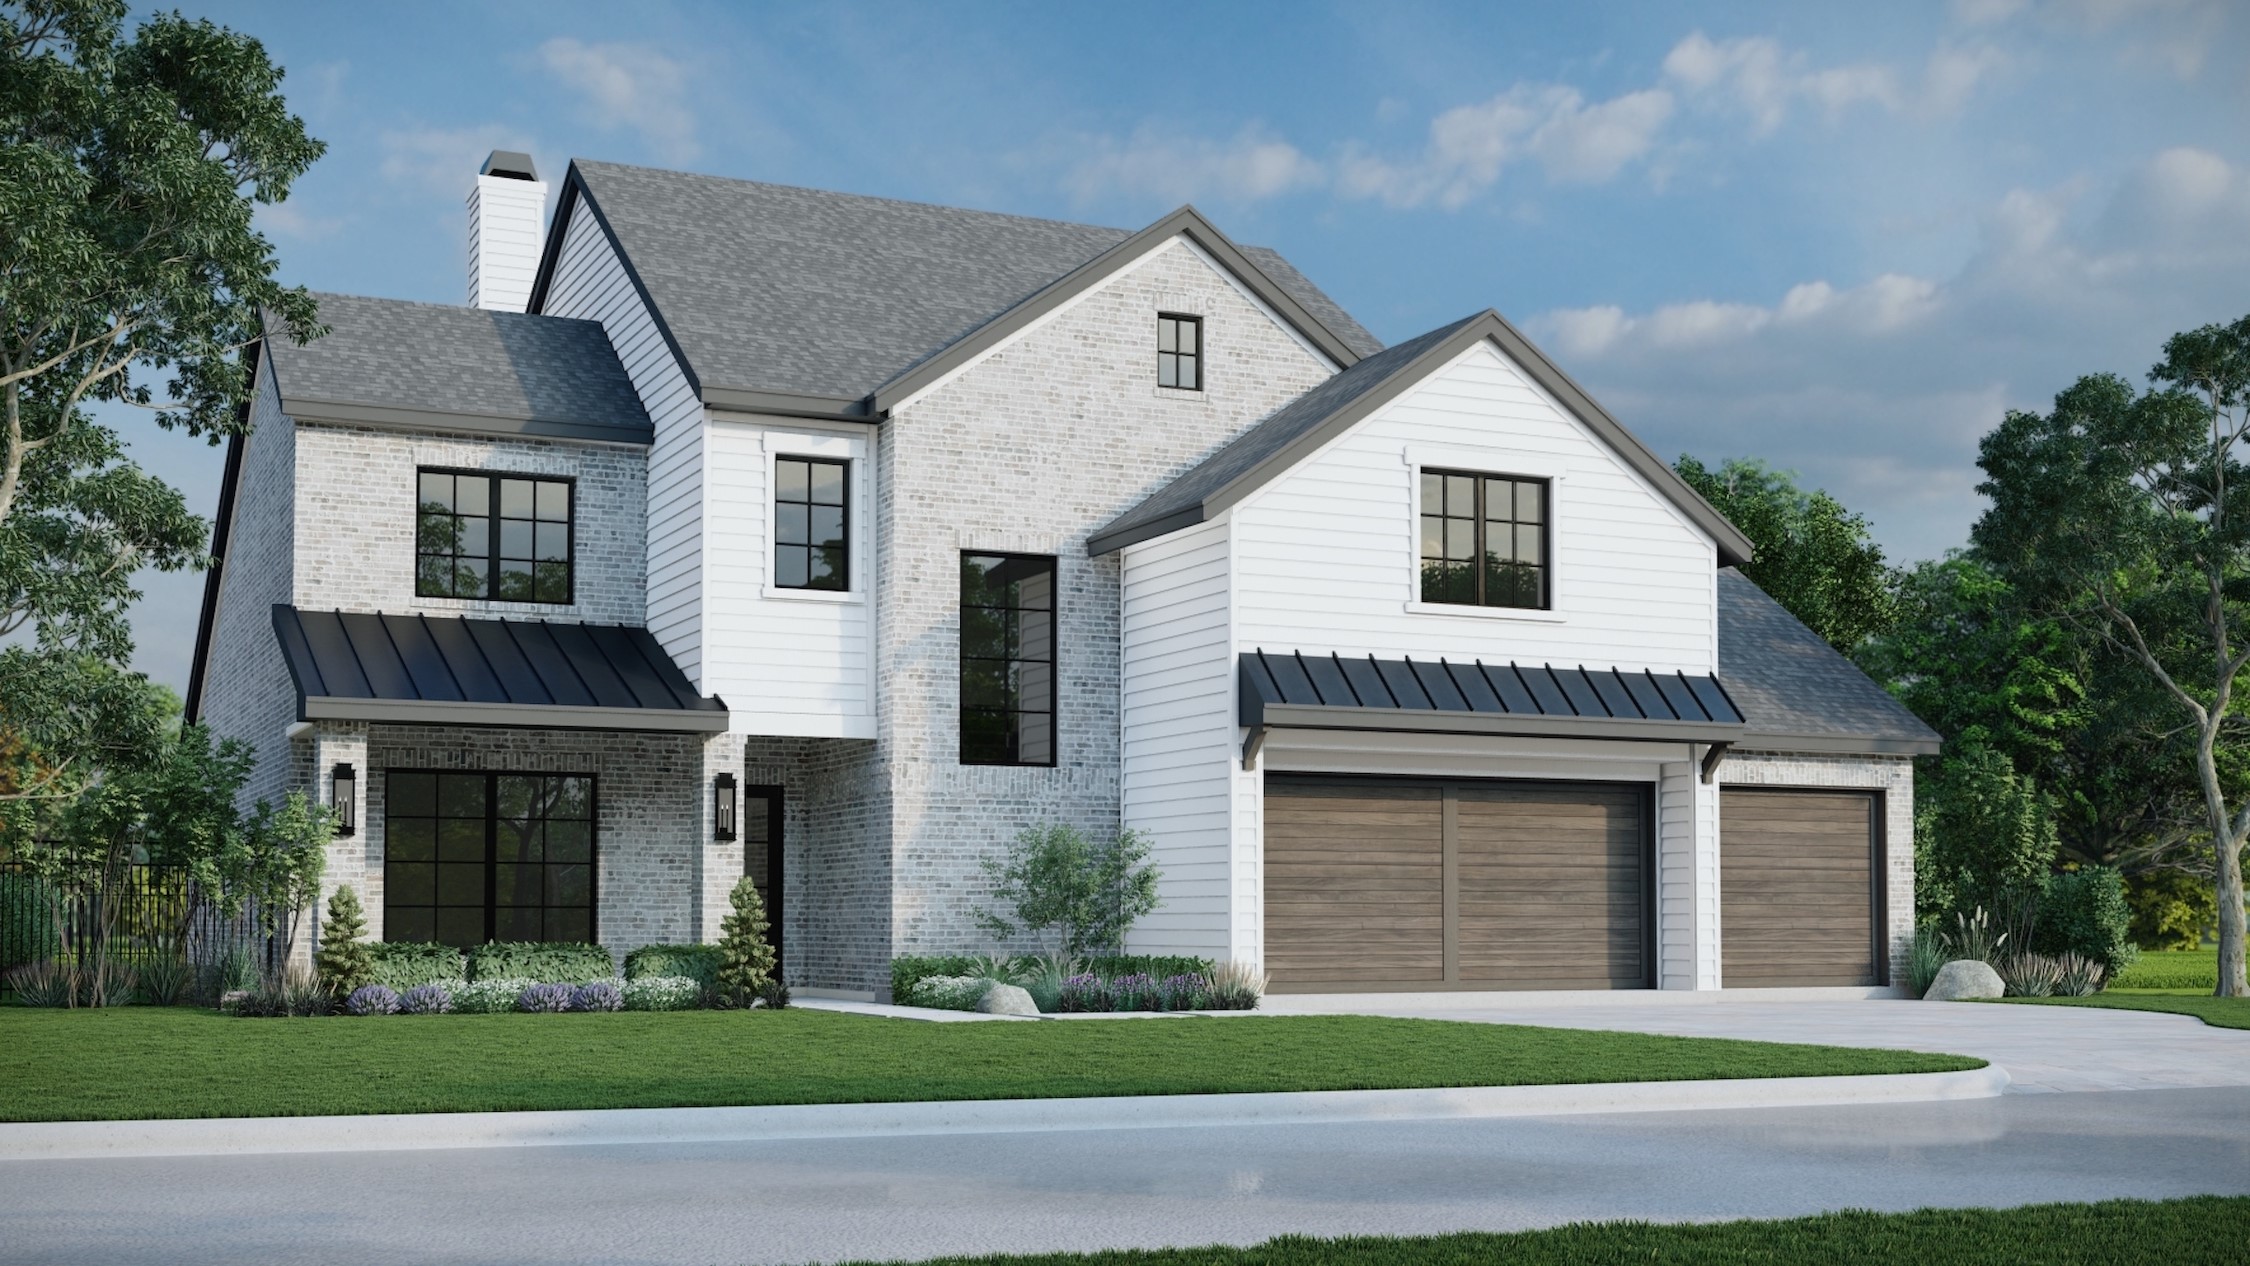 Exquisite custom build by multiple award winning Matt Powers Custom Homes located
on the 8th hole of The Woodlands Country Club Tournament Course. Photo rendering of front exterior.